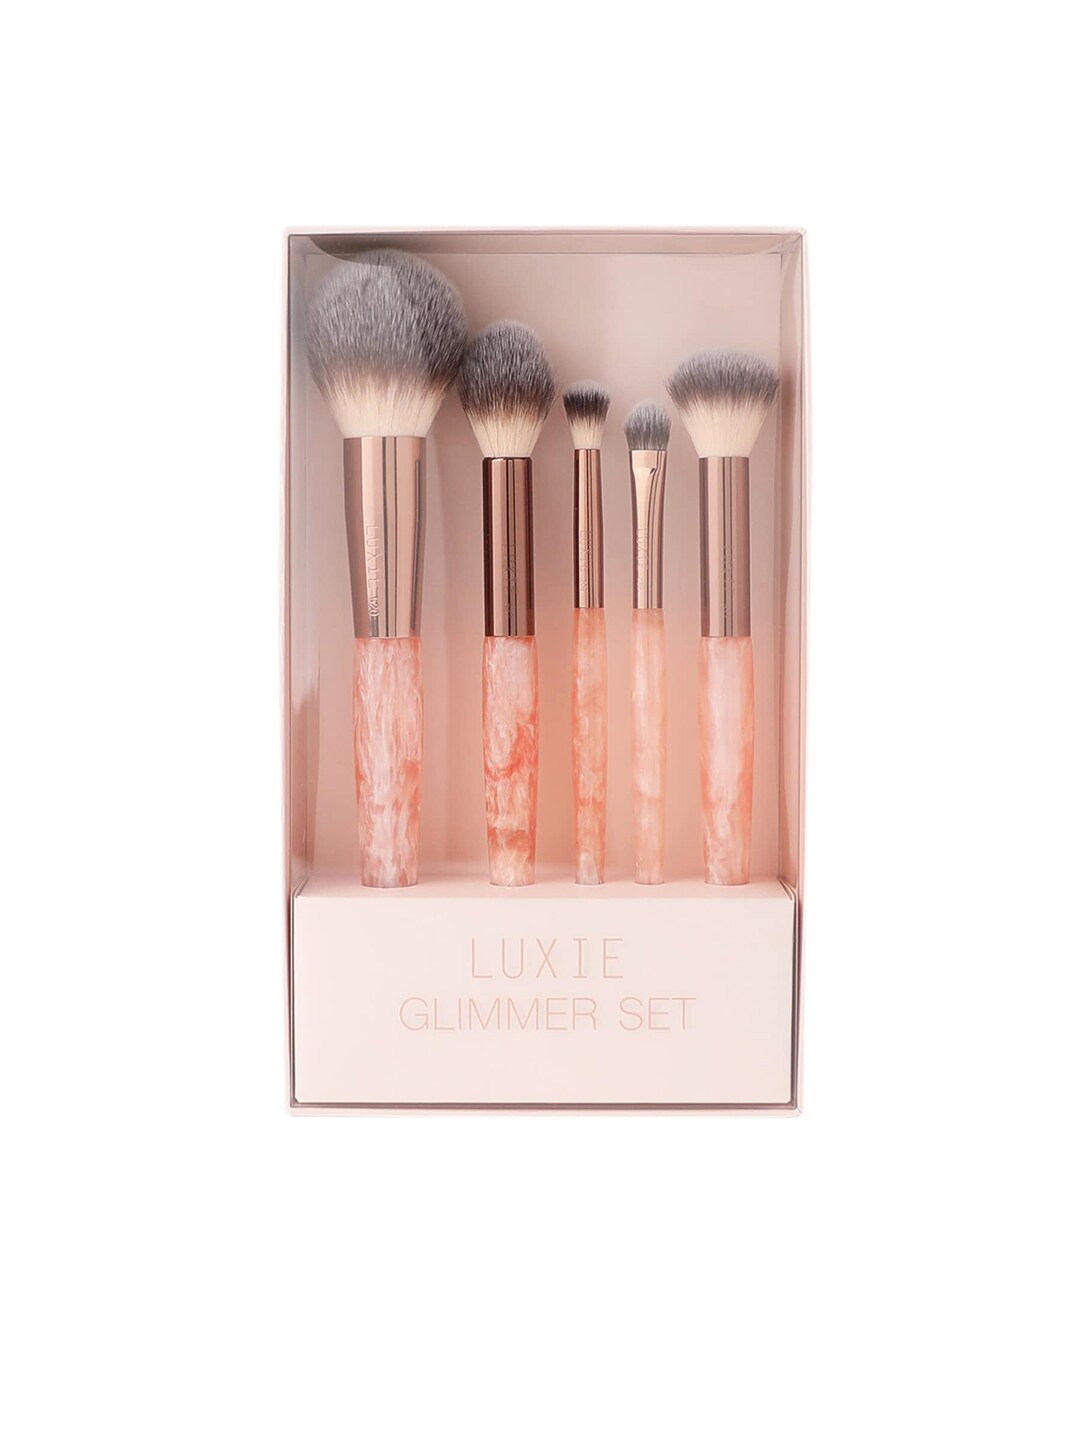 LUXIE Set of 5 Rose Gold Glimmer Face Brushes Price in India